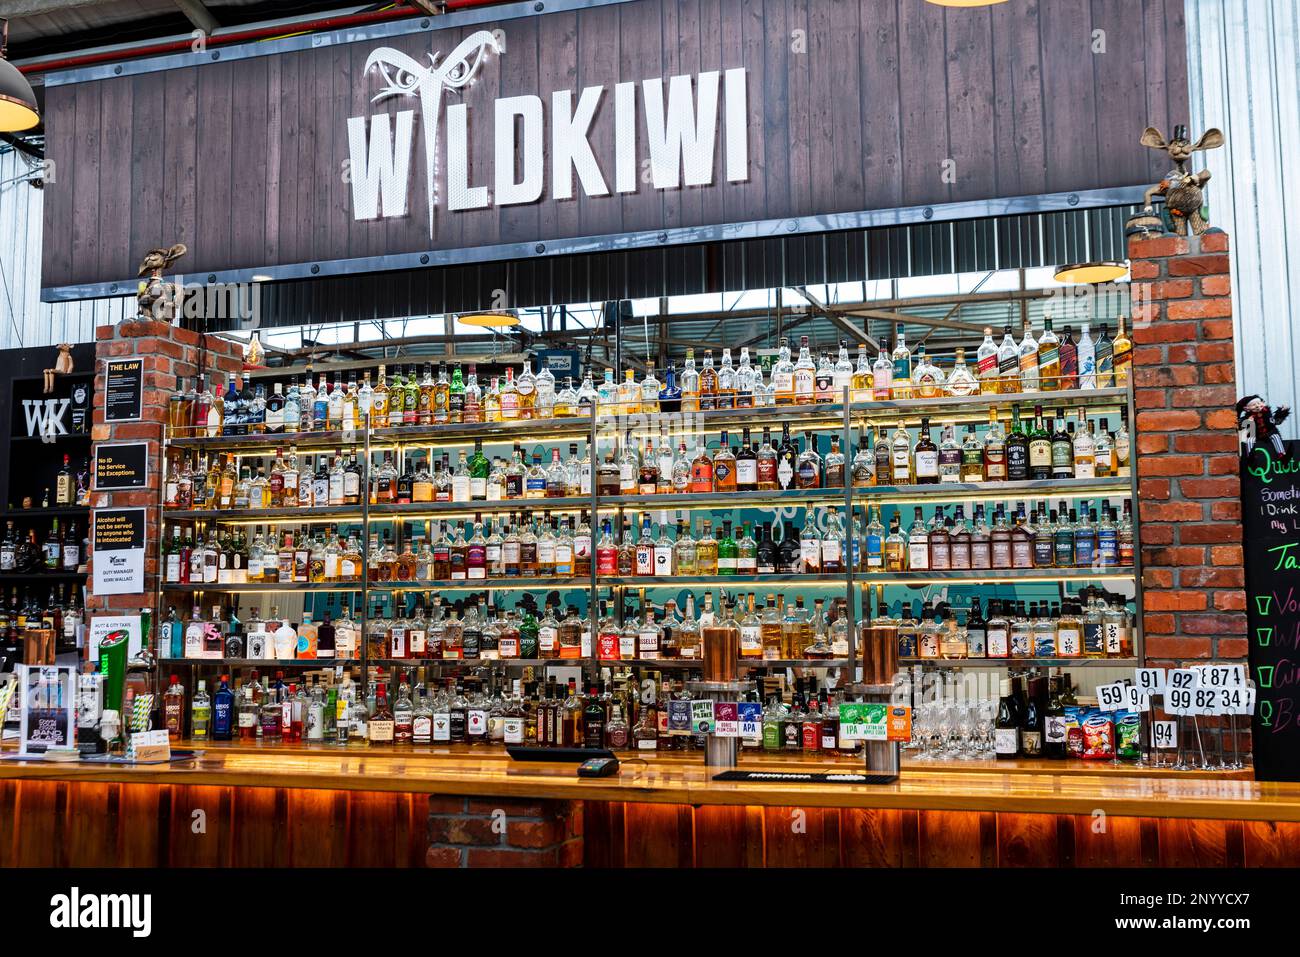 WildKiwi Distillery in Brewtown in Upper Hutt, New Zealand, a visitor attraction and business. Formerly Dunlop tyre factory site. Whisky distillery Stock Photo